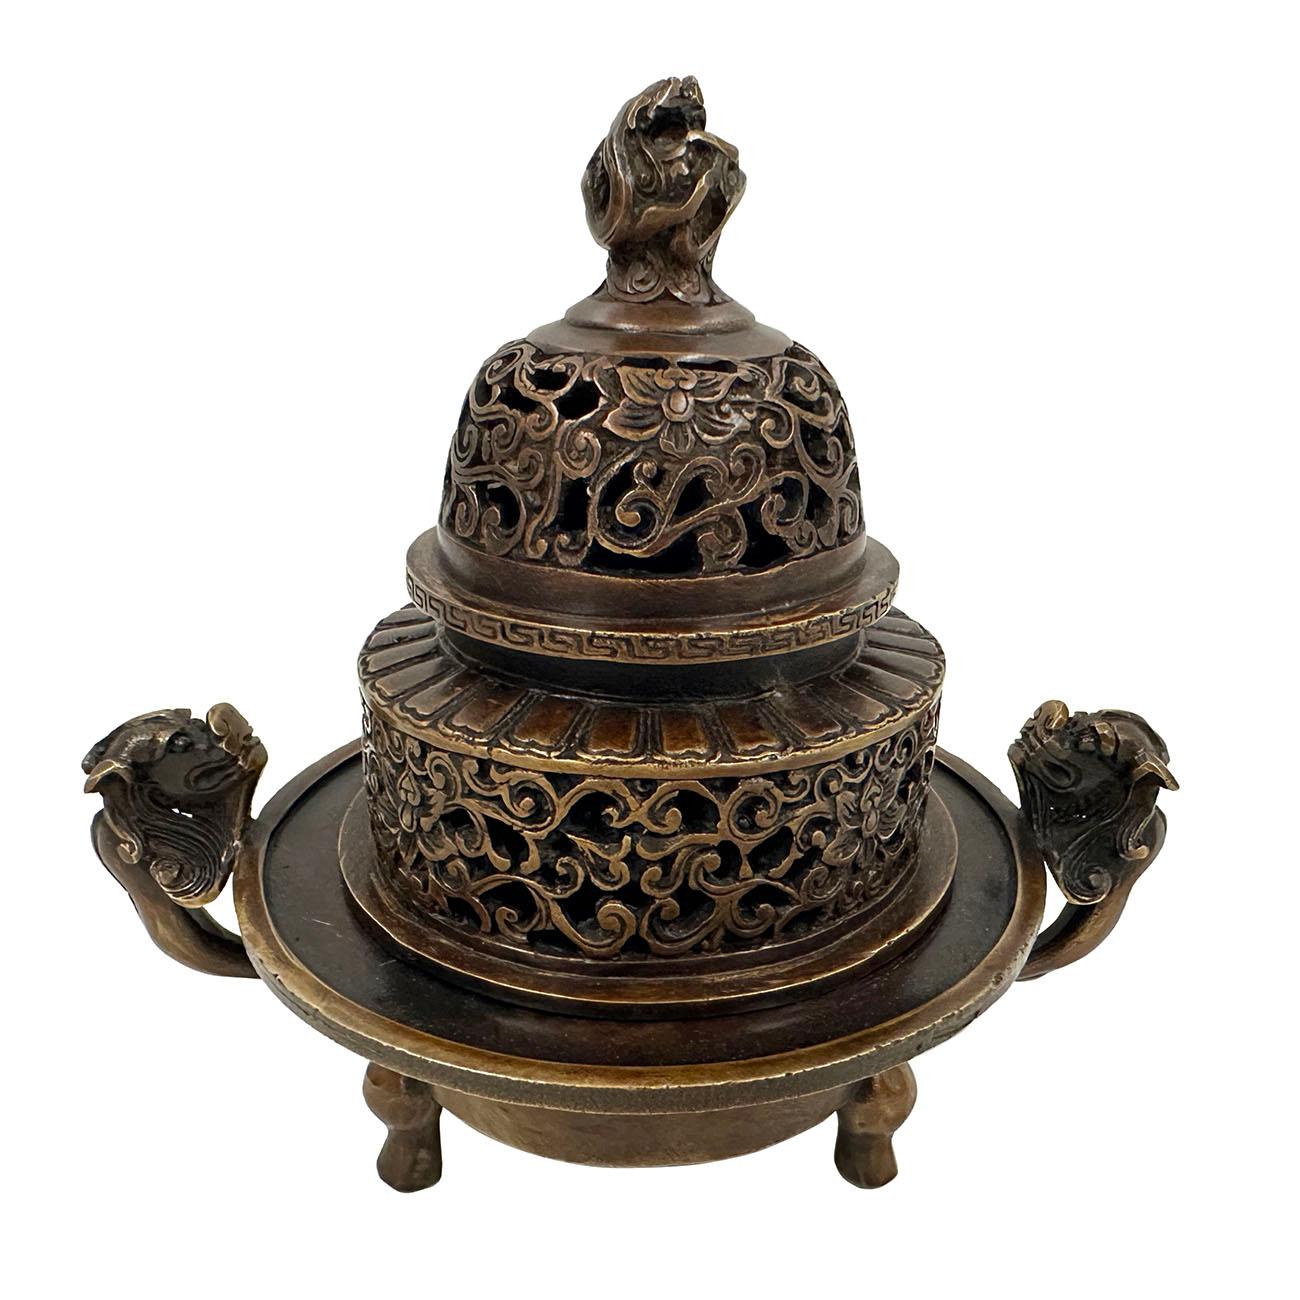 This magnificent Chinese Antique Carved Bronze incense burner has very detailed hand craft works around the body, a lot of open carved Buddhist floral pattern with dragon on lid and two dragons on the sides as the handles. From the pictures, you can